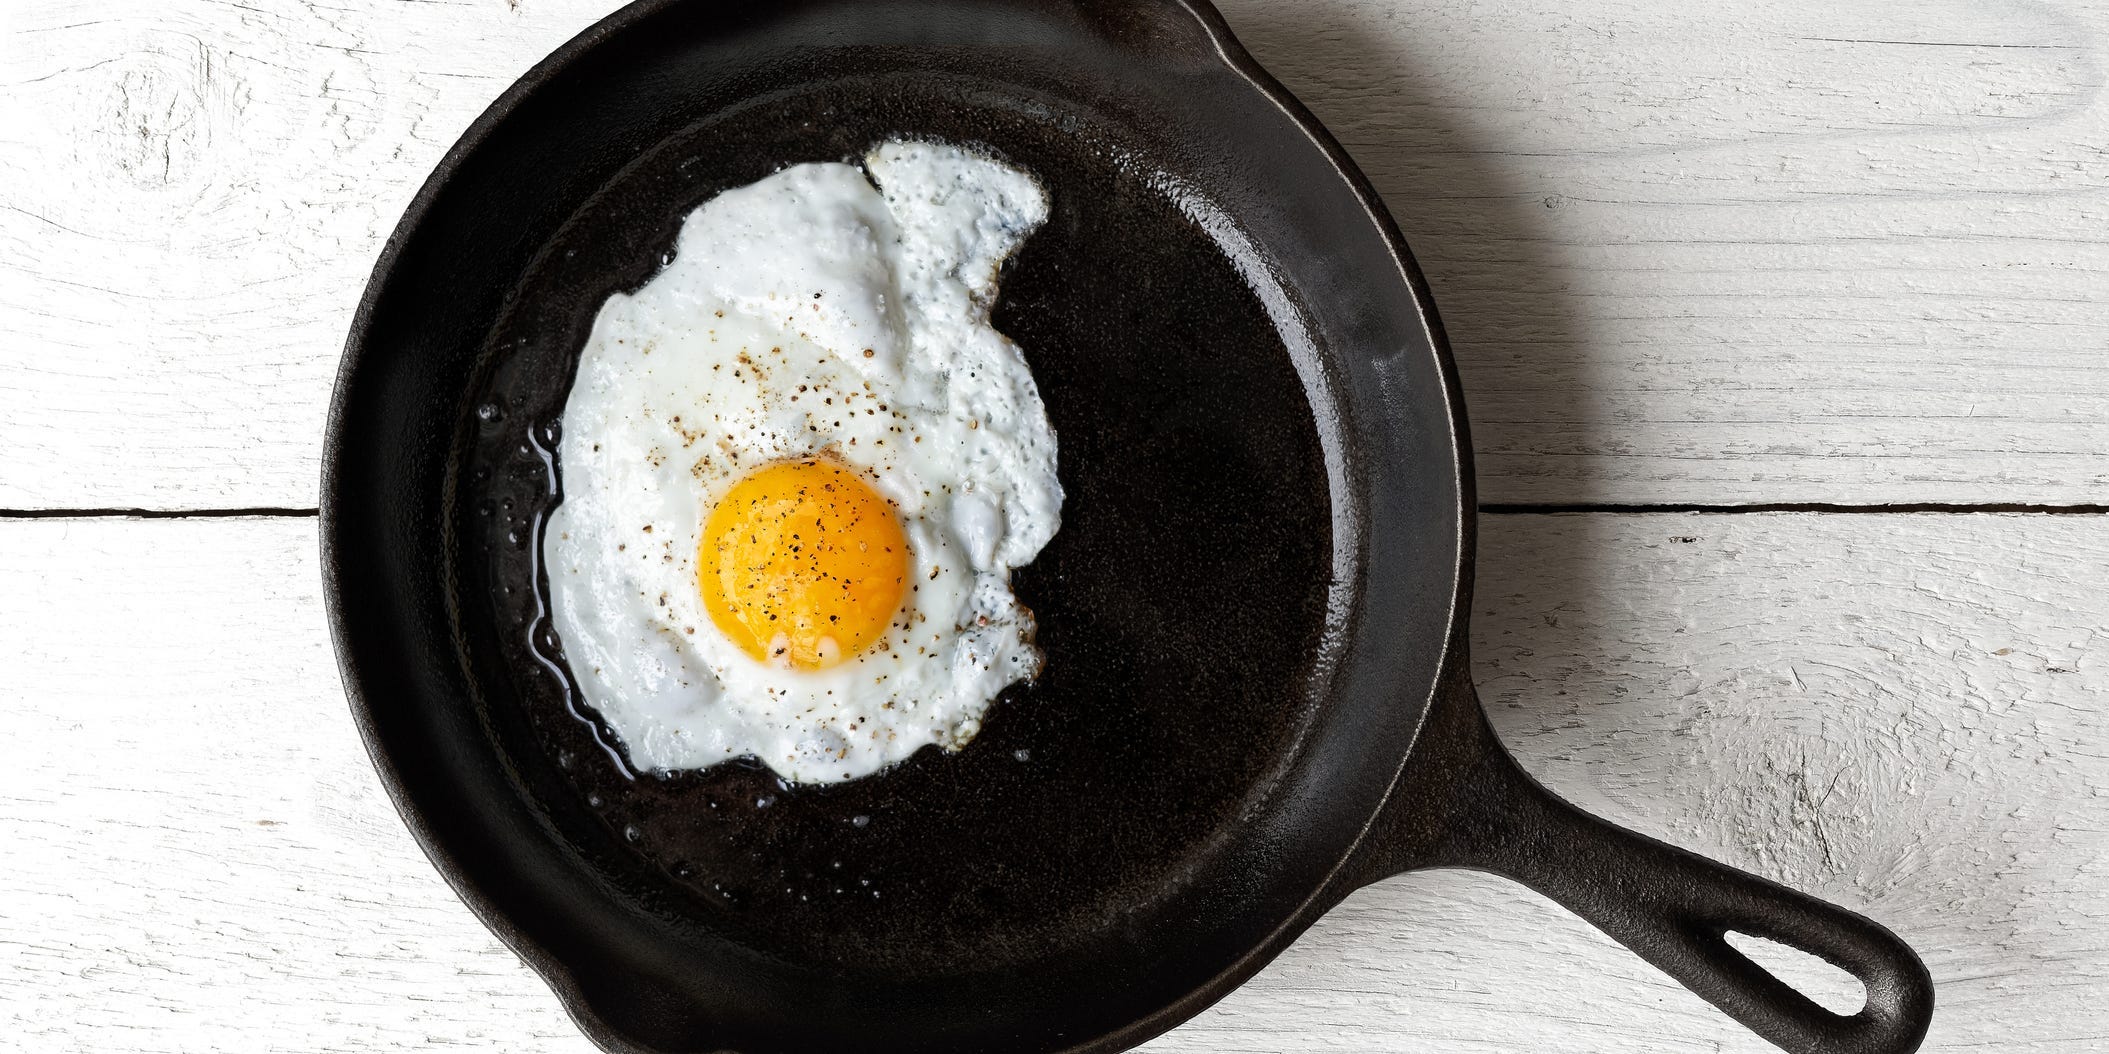 A fried egg in a cast iron skillet.